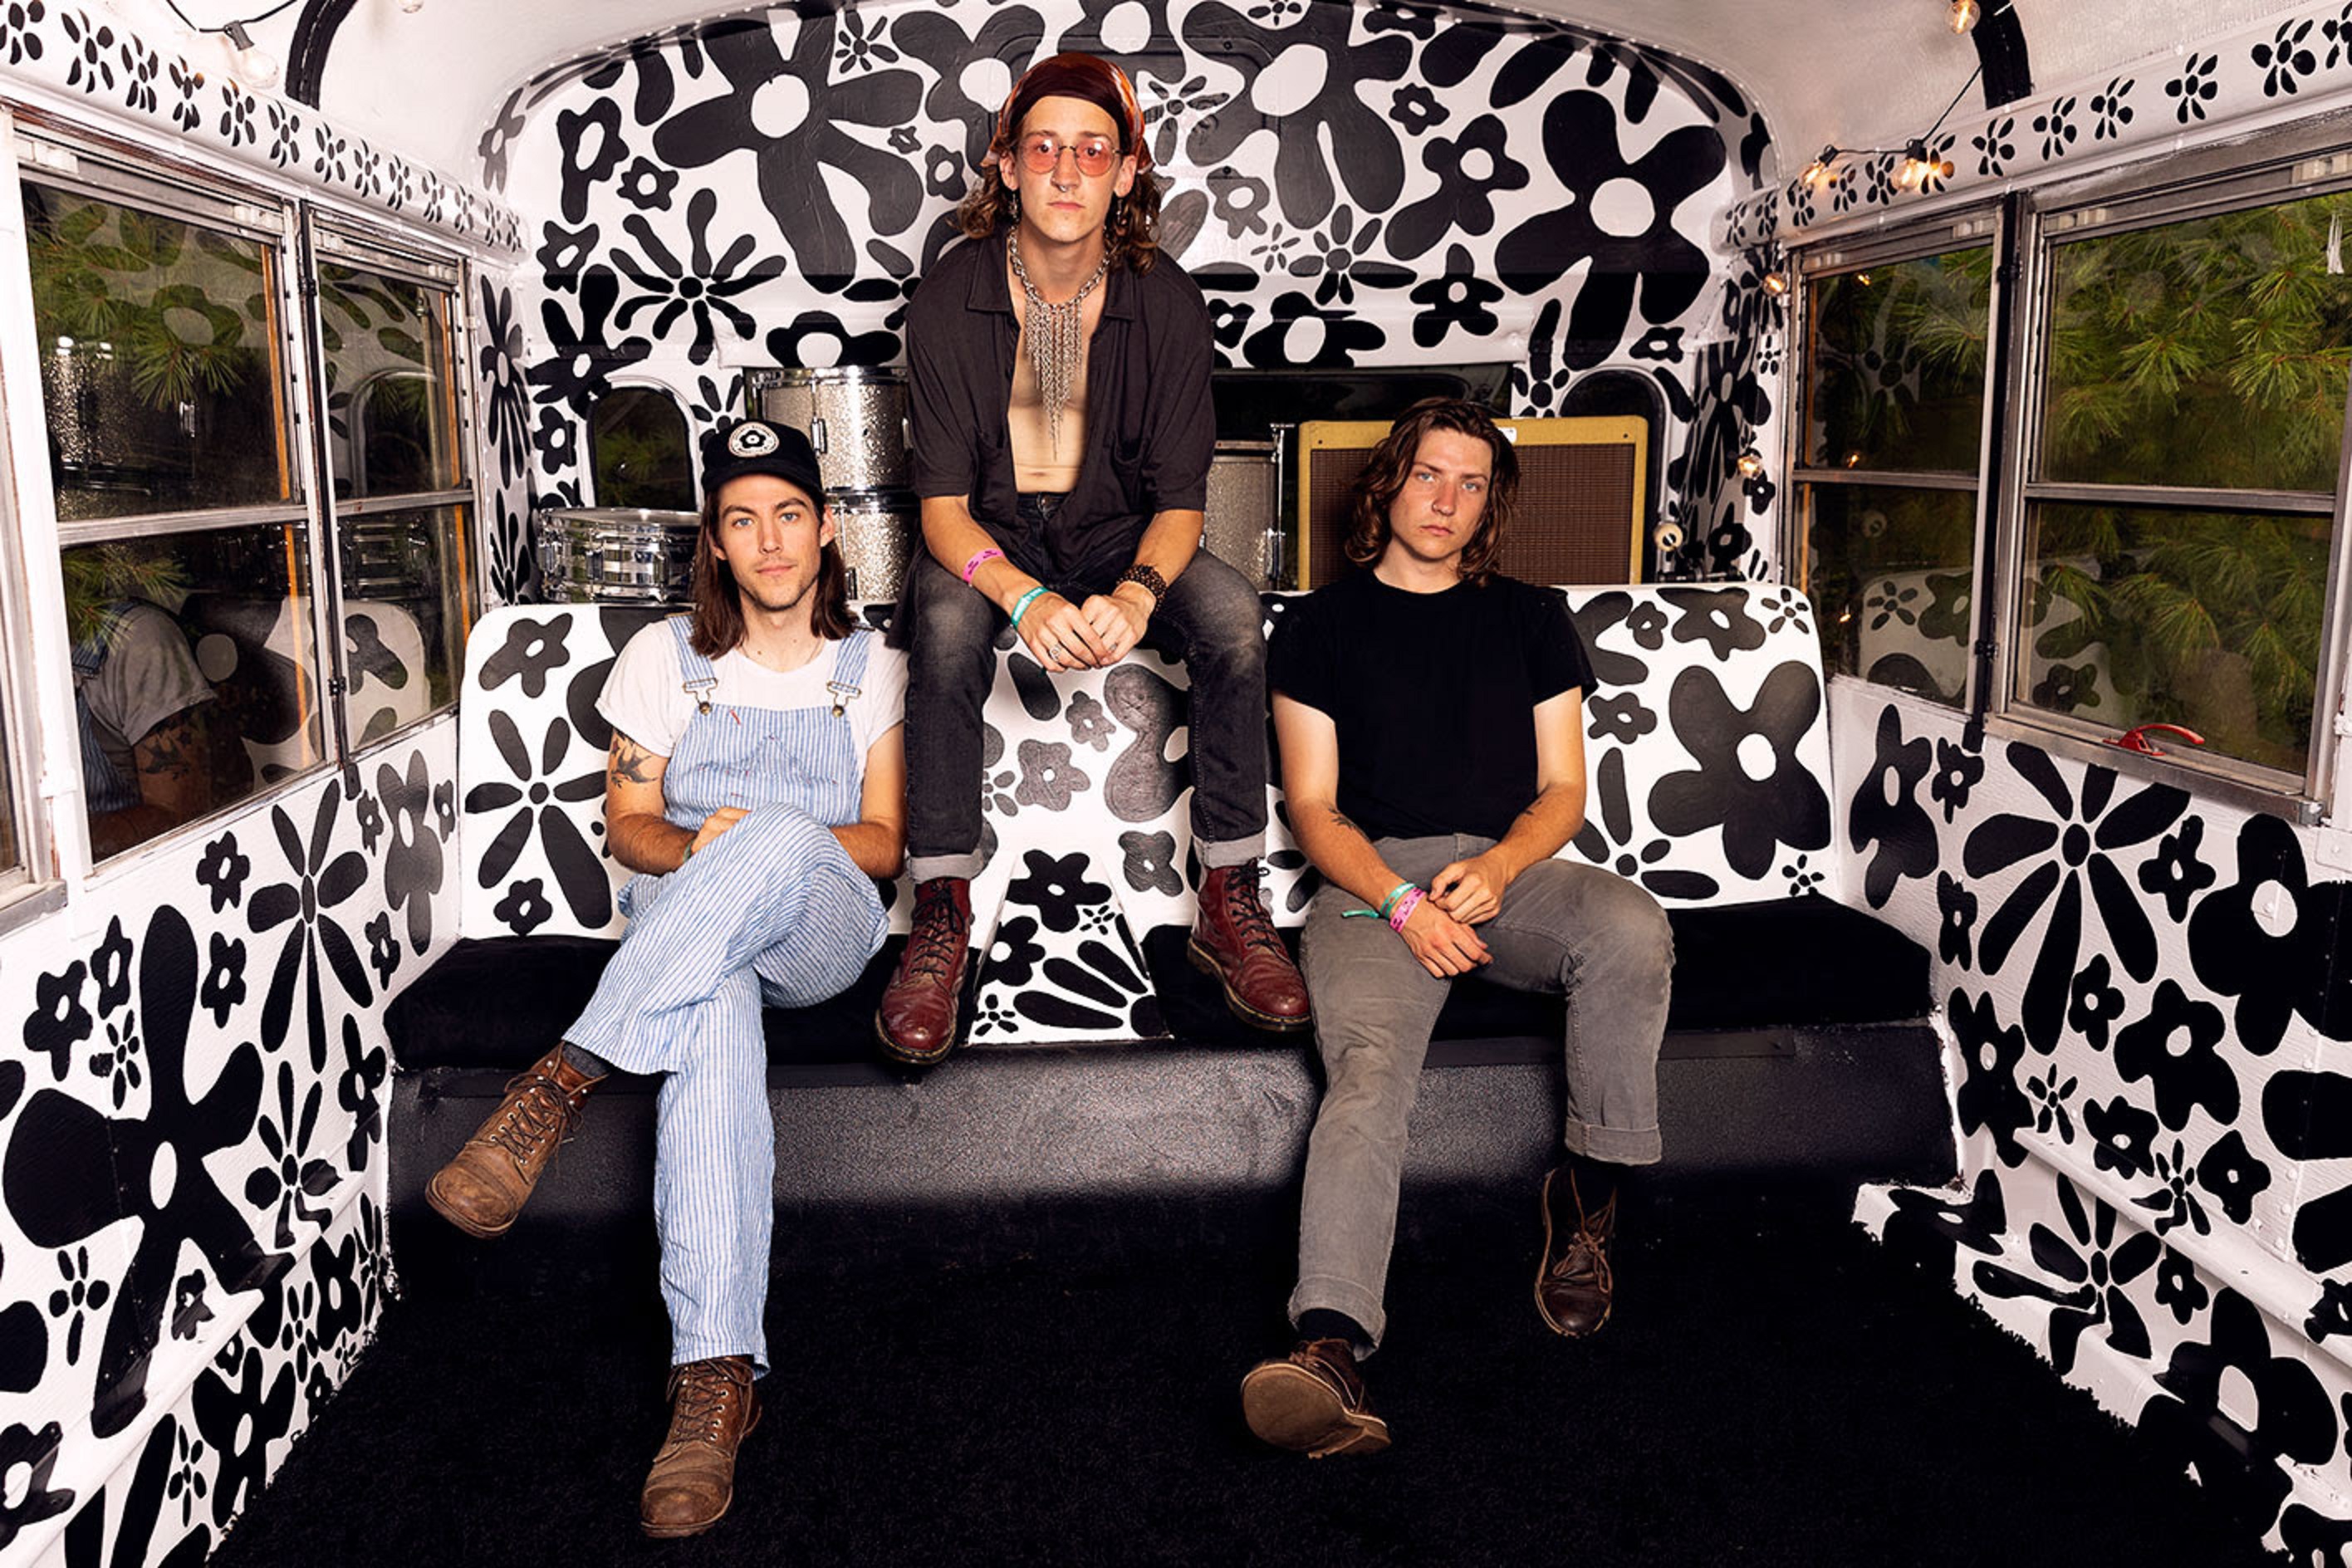 VIRGINIA’S BREAKOUT ACOUSTIC TRIO PALMYRA SHARE MUSIC VIDEO FOR “MEDICINE” AHEAD OF DECEMBER 2, 2022 SINGLE RELEASE